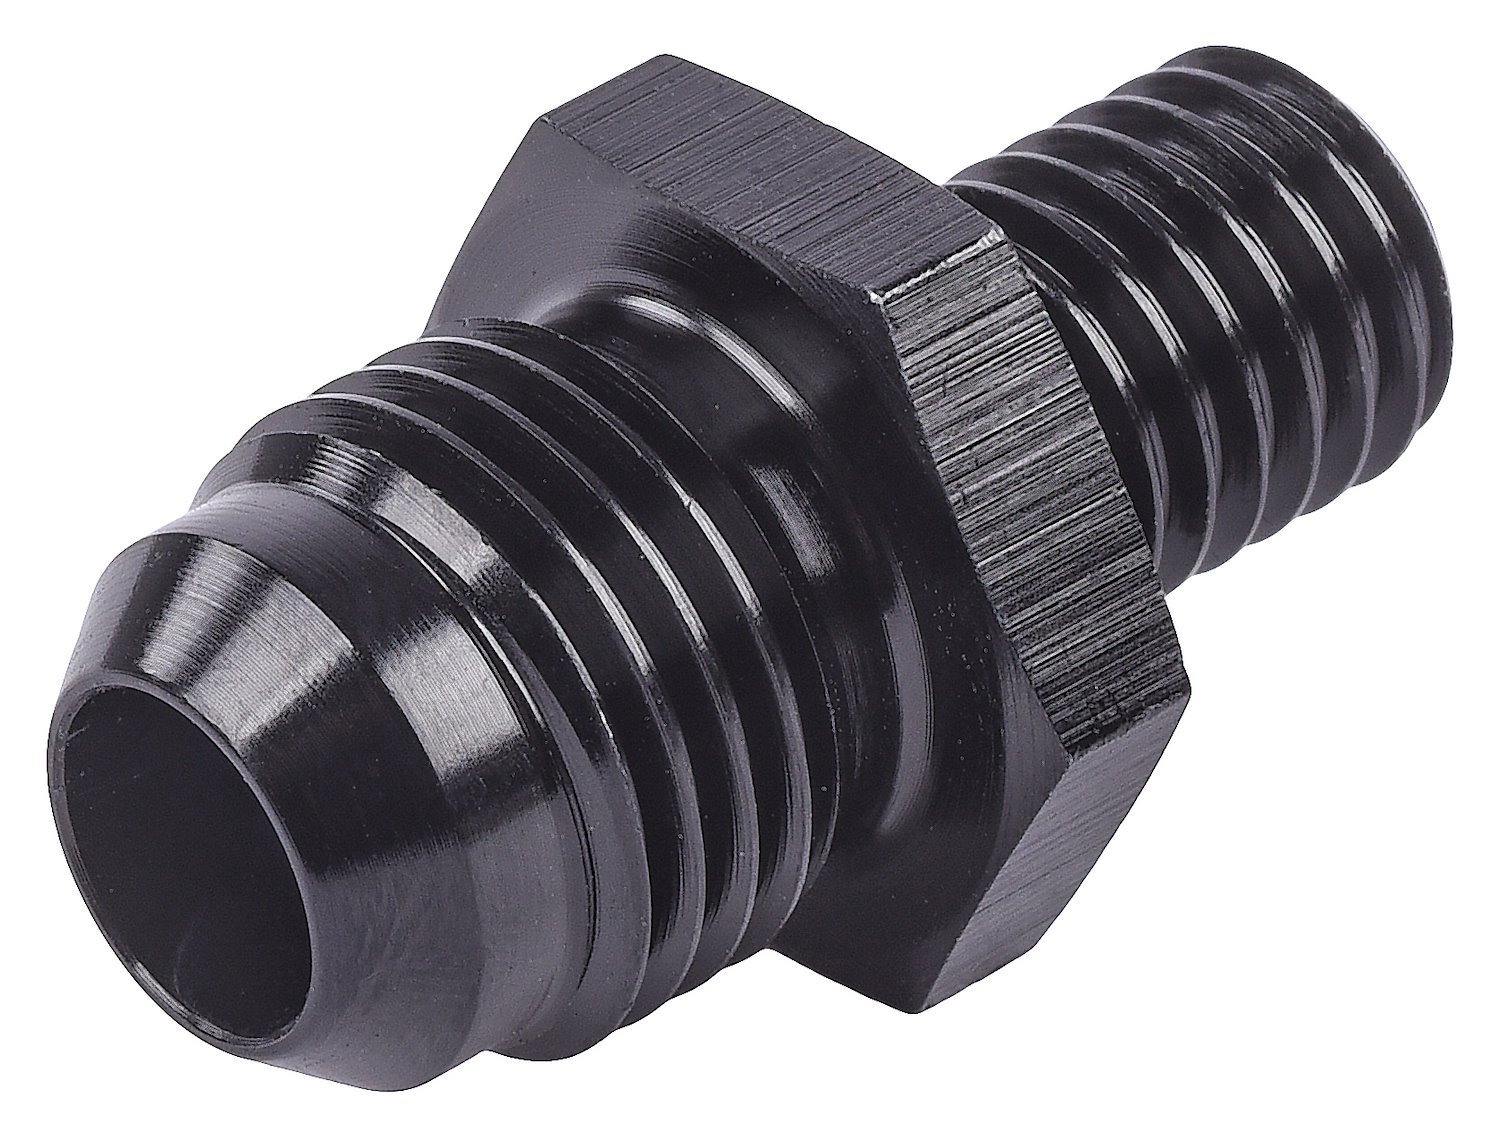 AN to Metric Adapter Fitting [-6 AN Male to 10mm x 1.5 Male, Black]